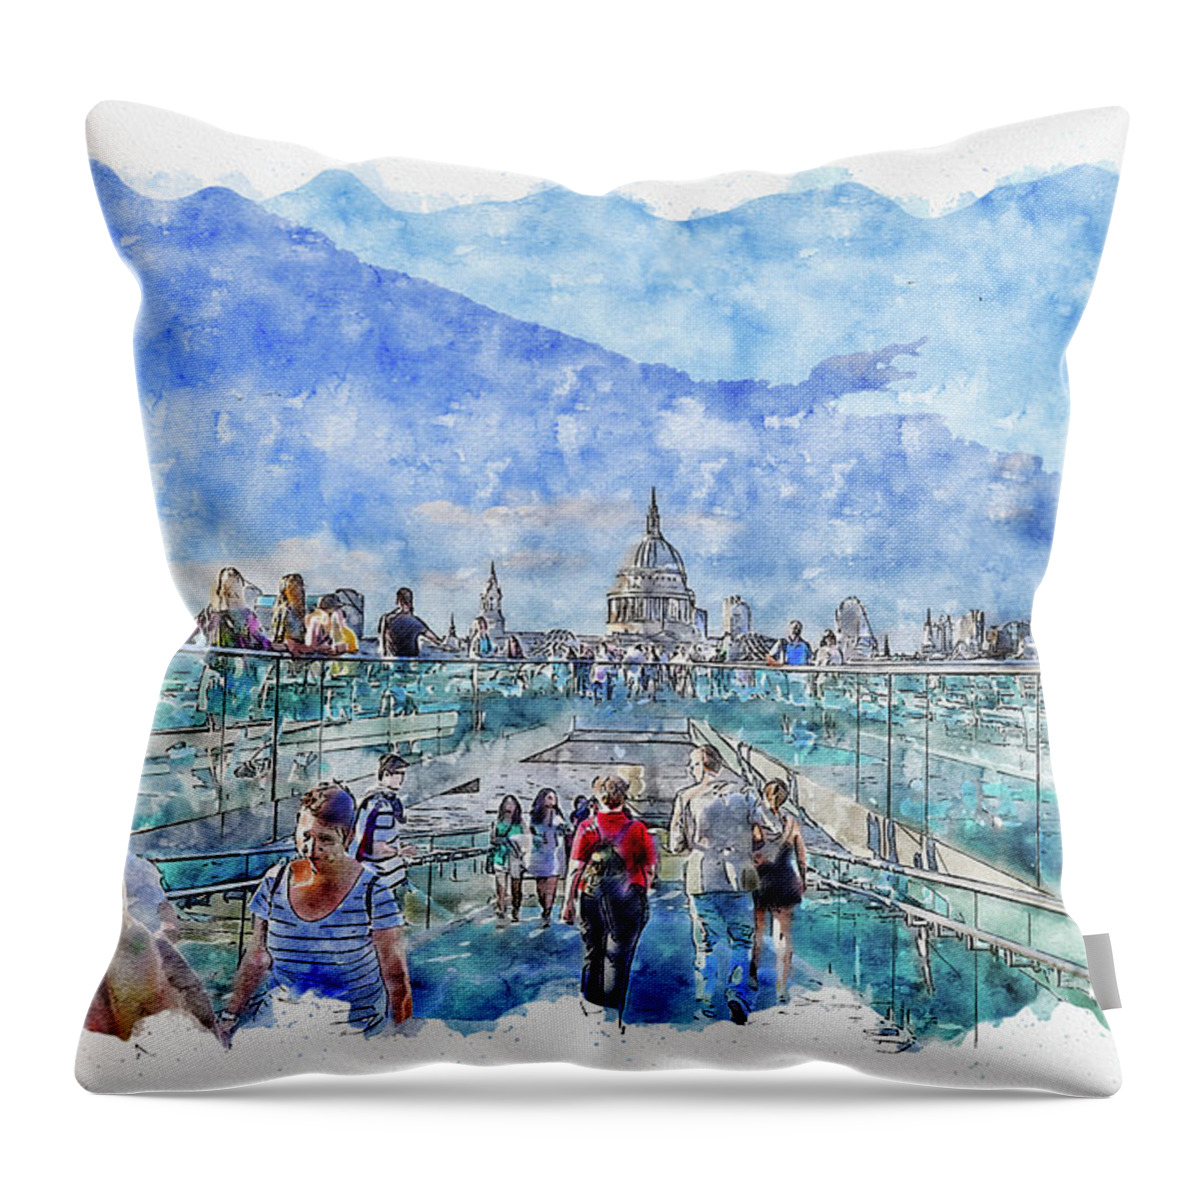 Travel Throw Pillow featuring the digital art Travel #watercolor #sketch #travel #sky by TintoDesigns